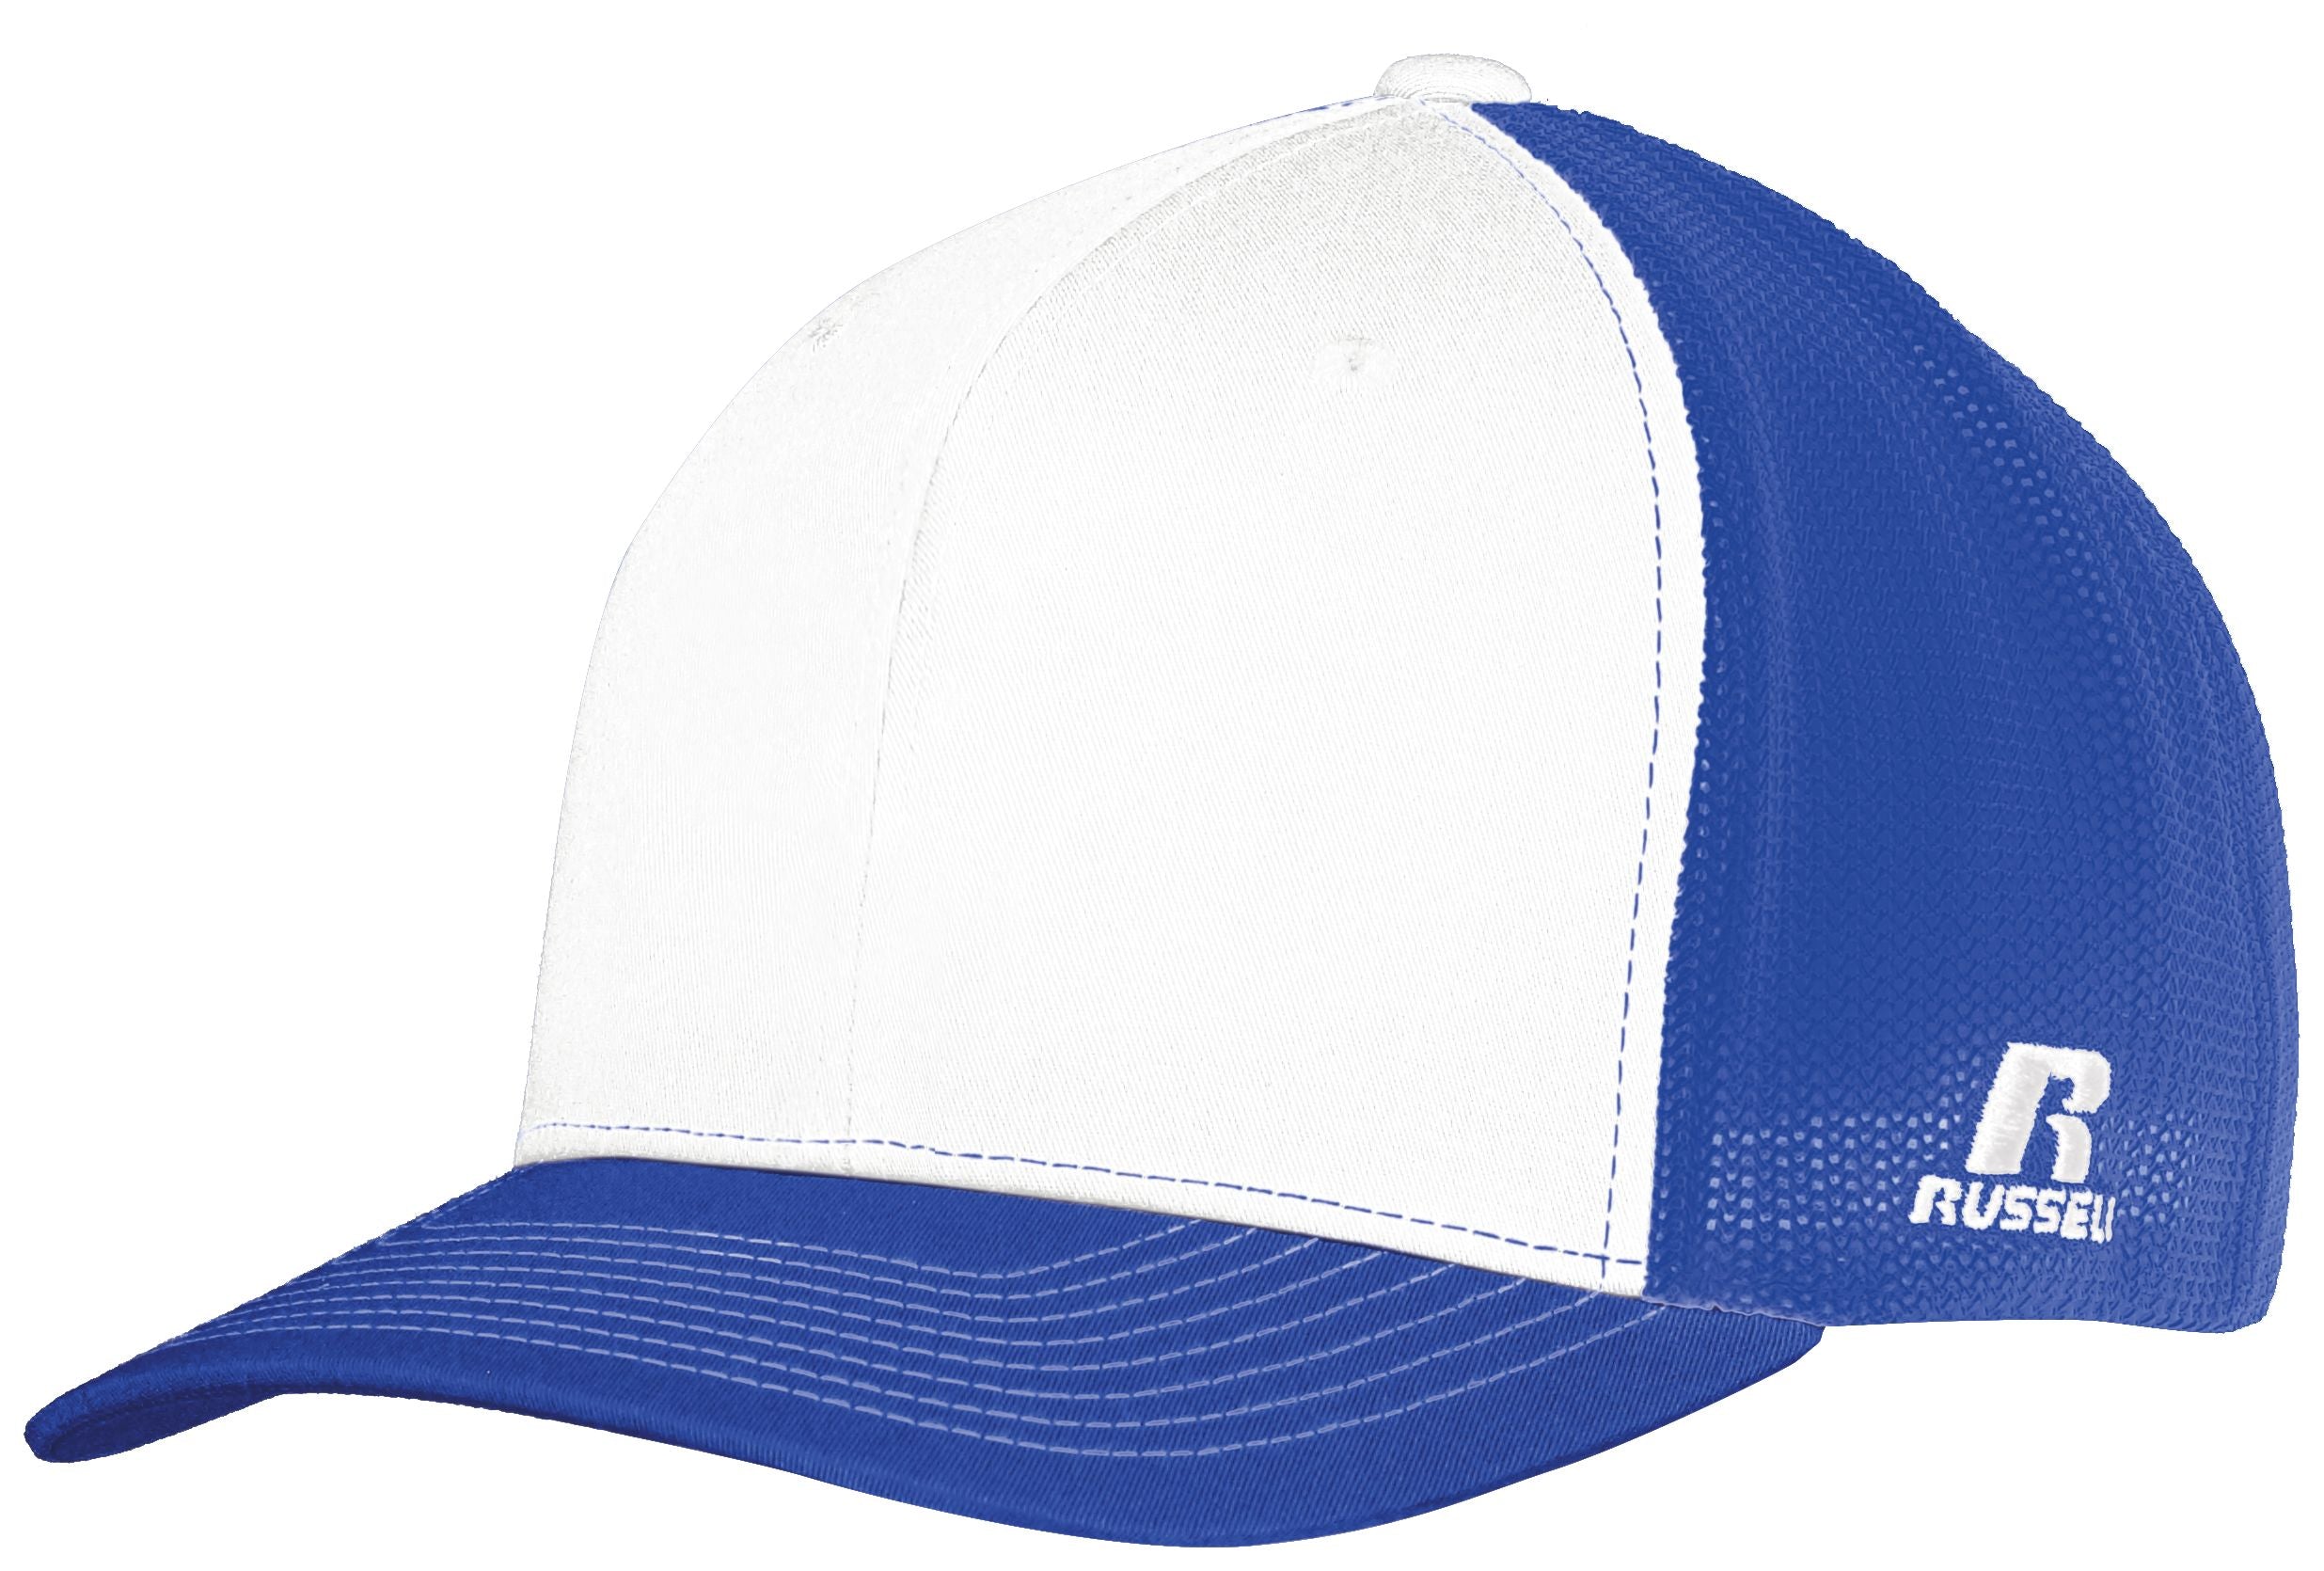 Russell Athletic Flexfit Twill Mesh Cap in White/Royal  -Part of the Adult, Headwear, Headwear-Cap, Russell-Athletic-Products product lines at KanaleyCreations.com